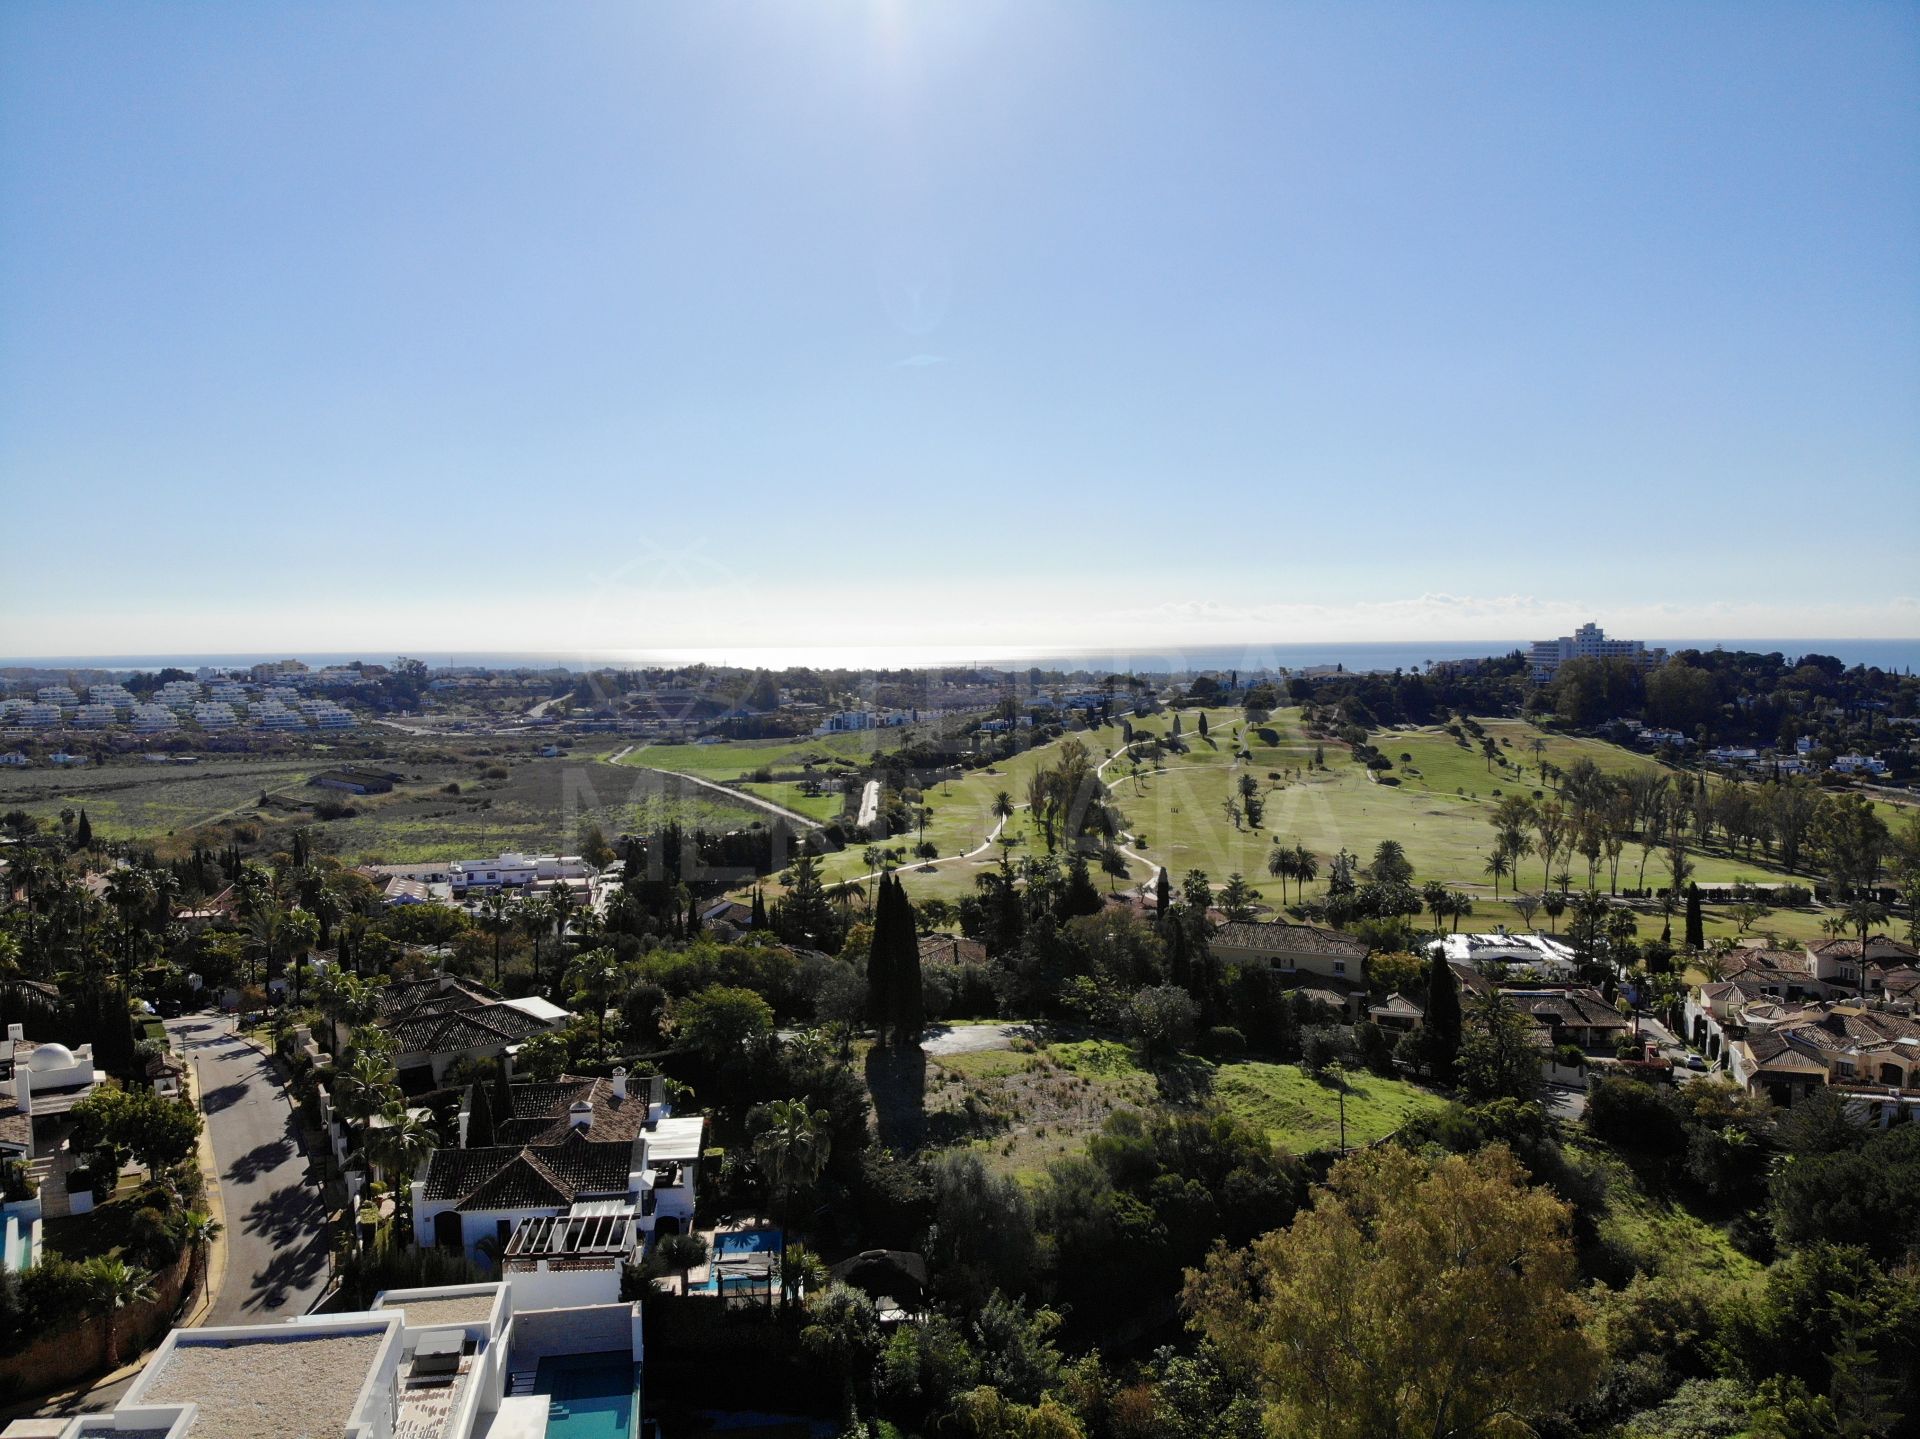 Sizeable plot with glorious views for sale in highly sought after Paraiso Alto, Benahavis